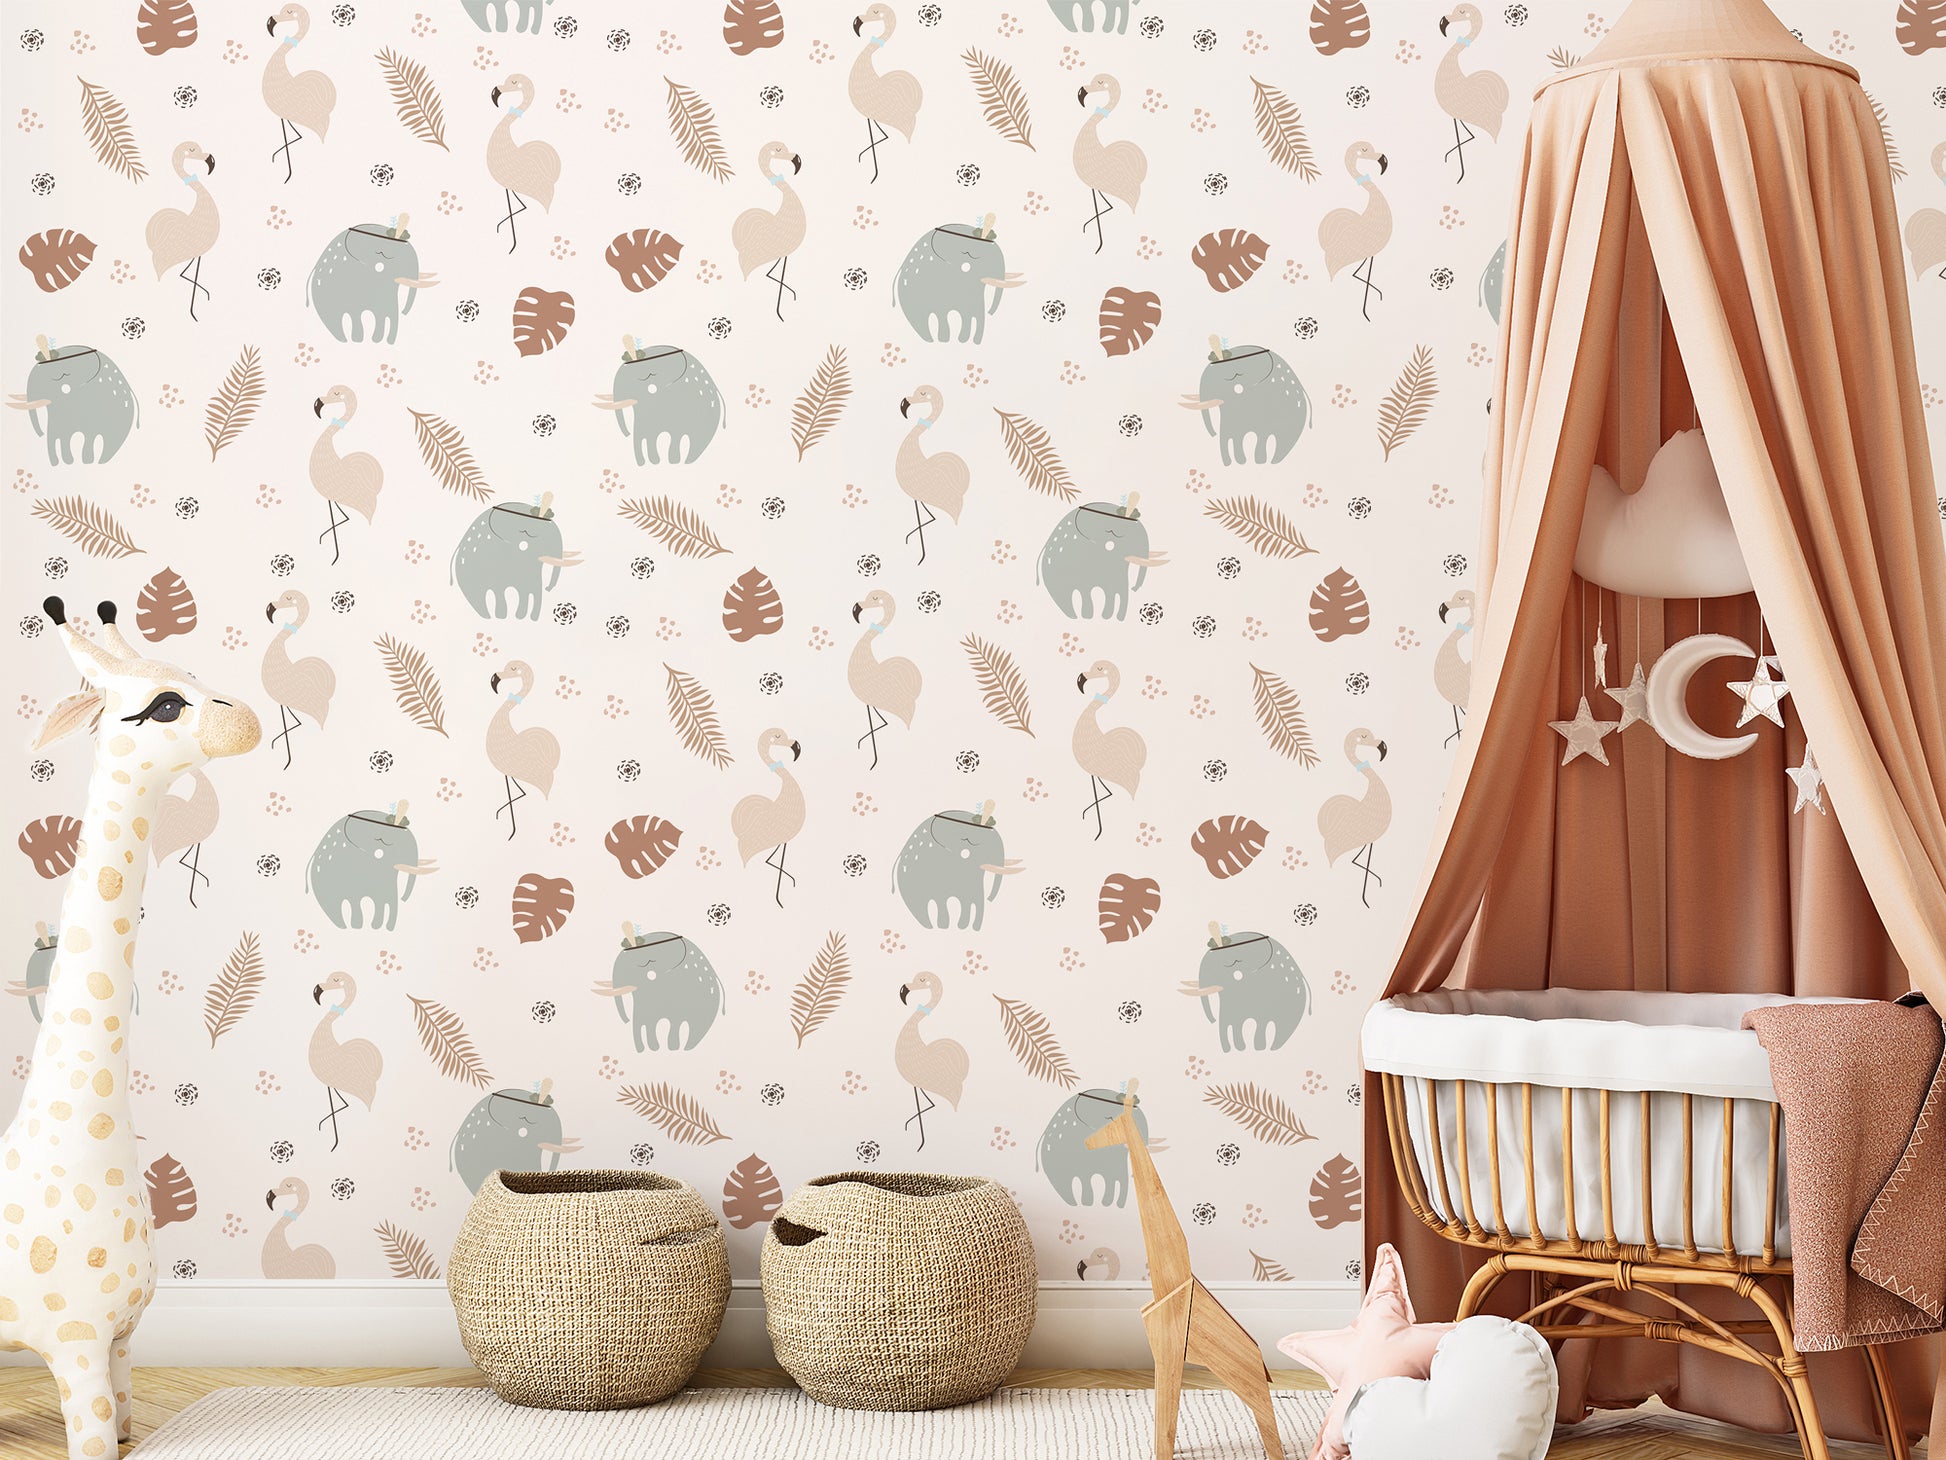 Tabatha Children's Cot Covered in Beige Fabric With Toy Giraffe